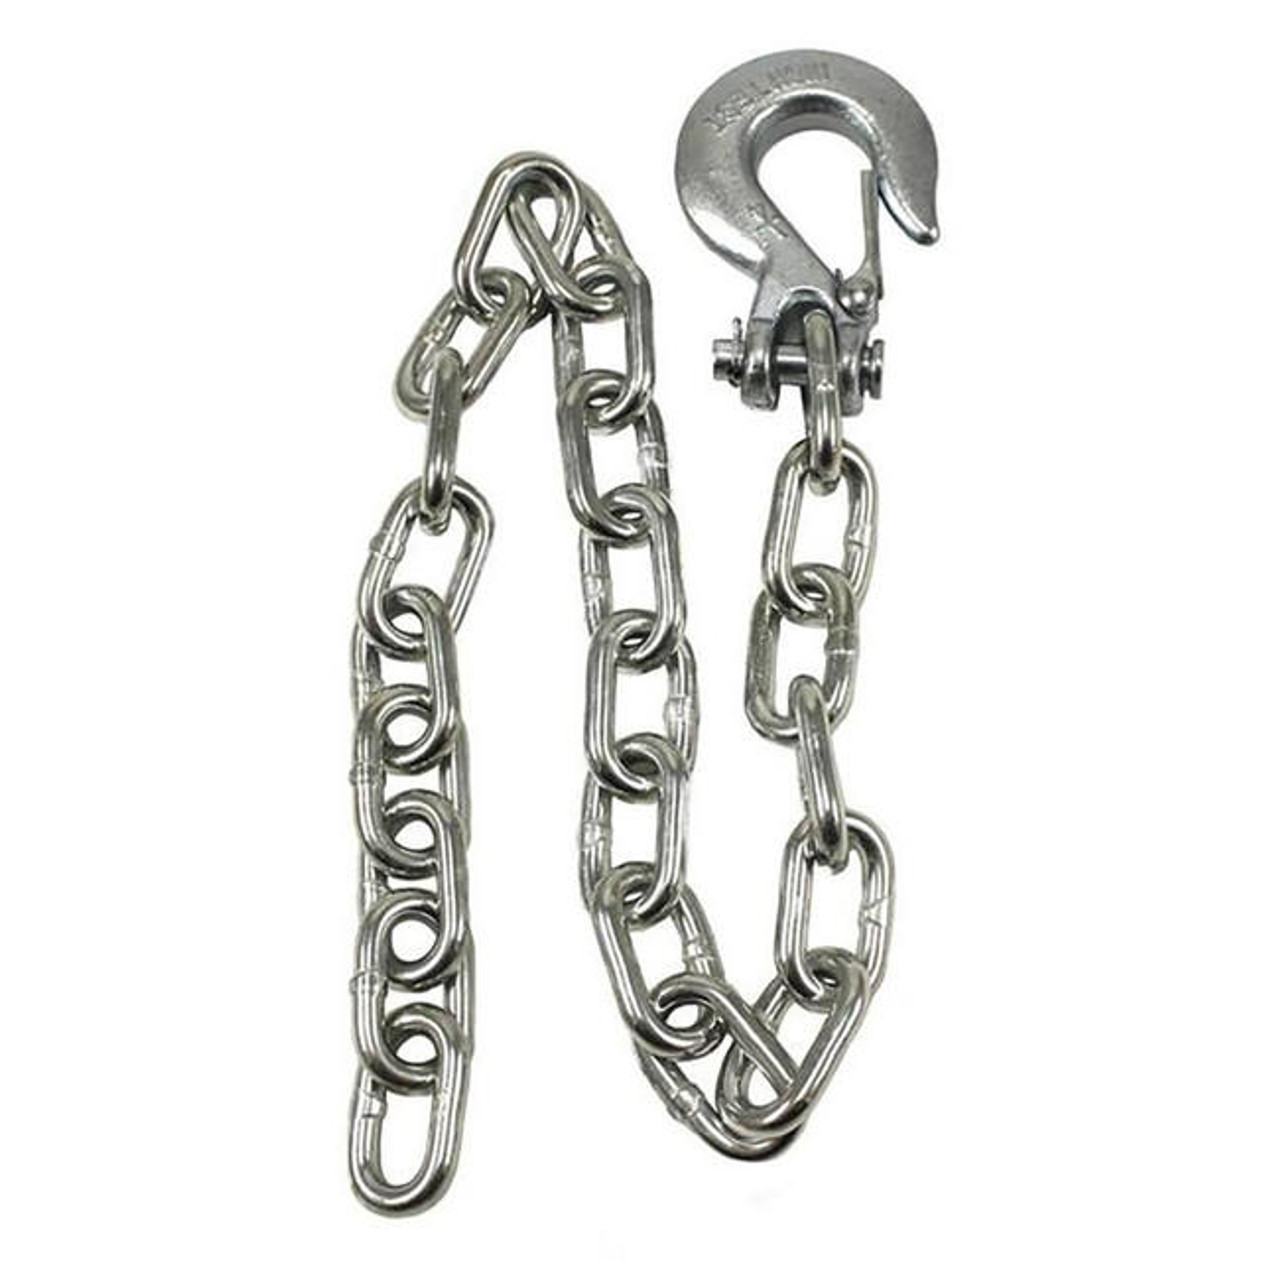 1/4 x 30 Trailer Safety Chain 7800# Capacity